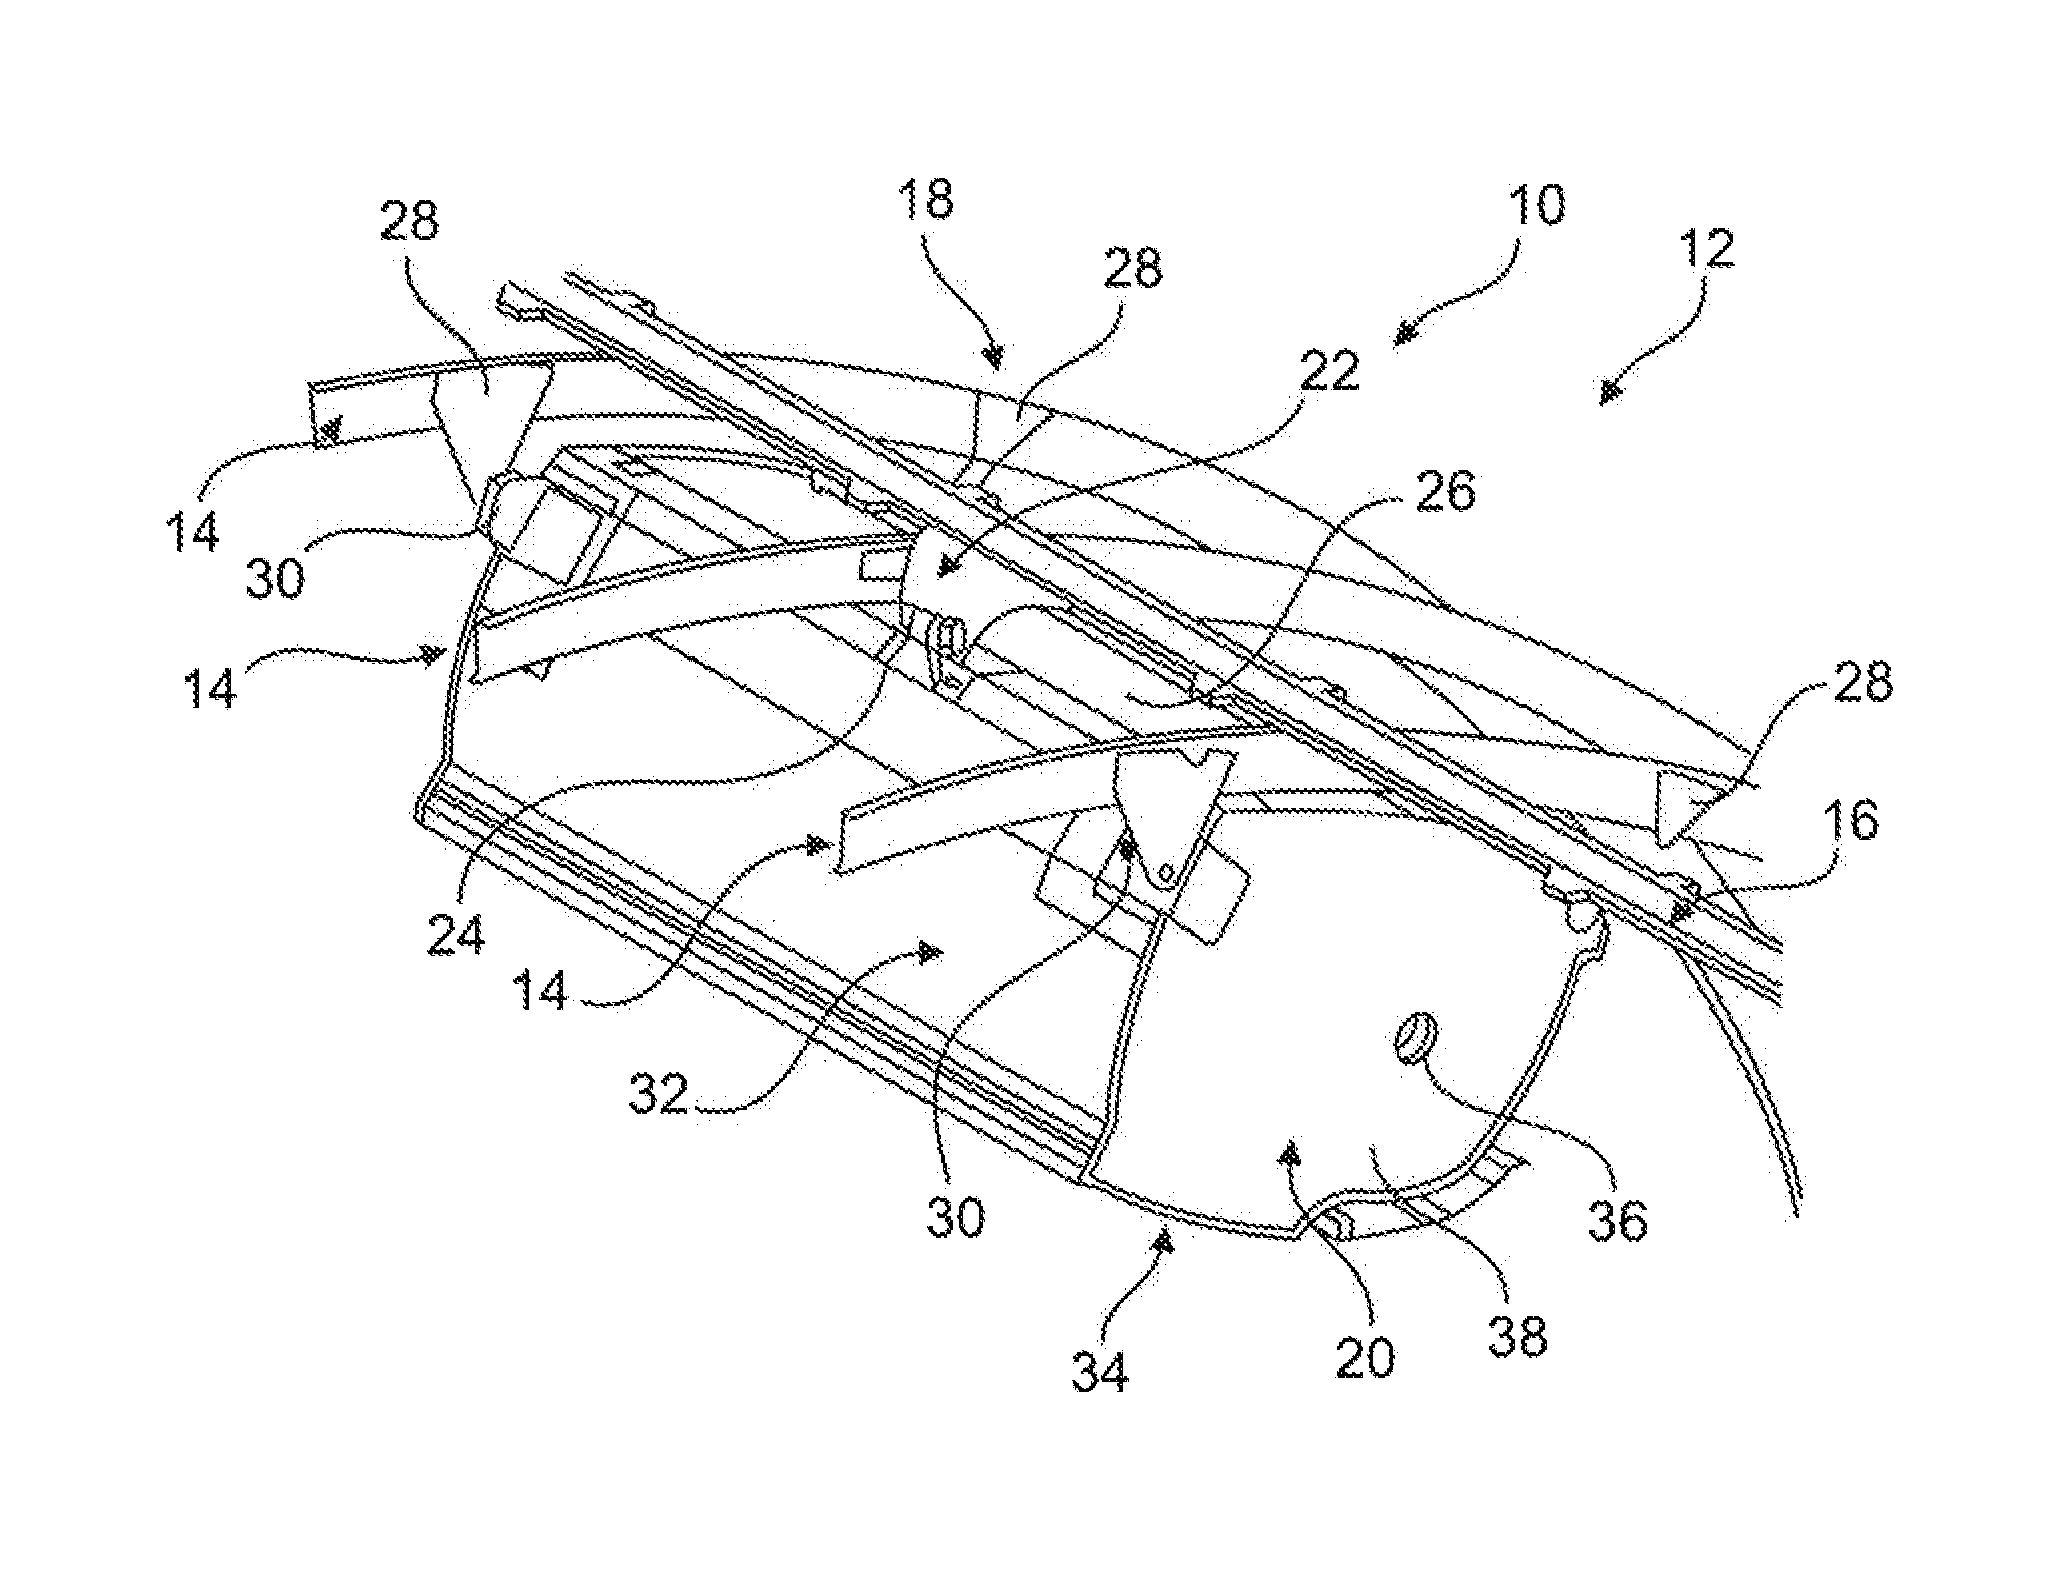 Attachment structure of an aircraft